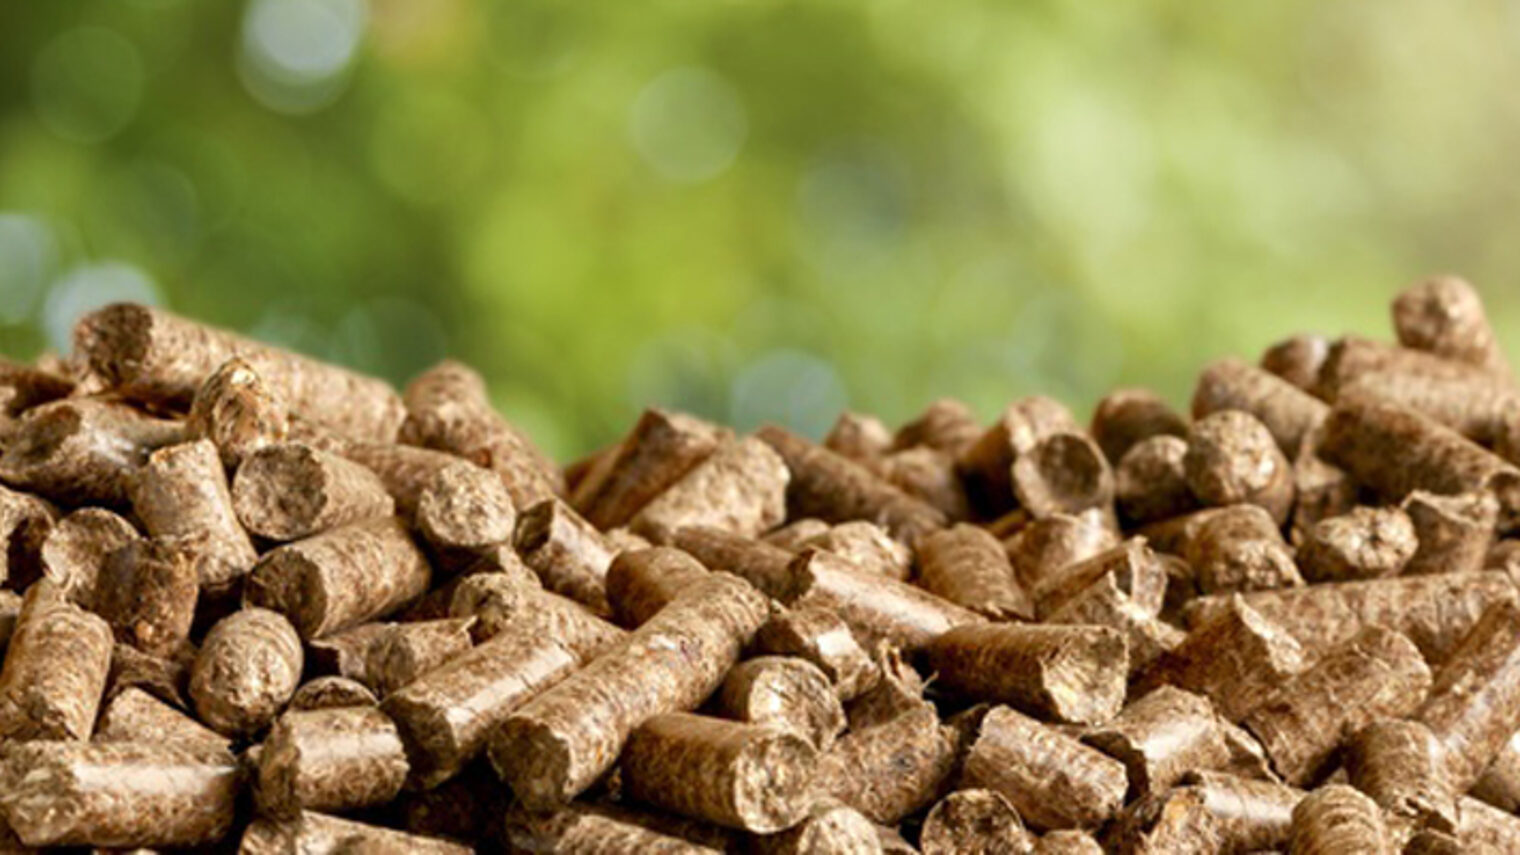 Biomass. Schlagwort(e): 6113, biomass, boilers, biofuel, pellet, wood, fuel, bio, stove, heating, 6113, biomass, boilers, biofuel, pellet, wood, fuel, bio, stove, heating, mass, woodchip, green, sawdust, wood chip, flaming, granule, natural, renewable energy, energy source, conservation, eco, power, central, recycling, power source, burn, environmentally friendly, biomass boiler, source, energy